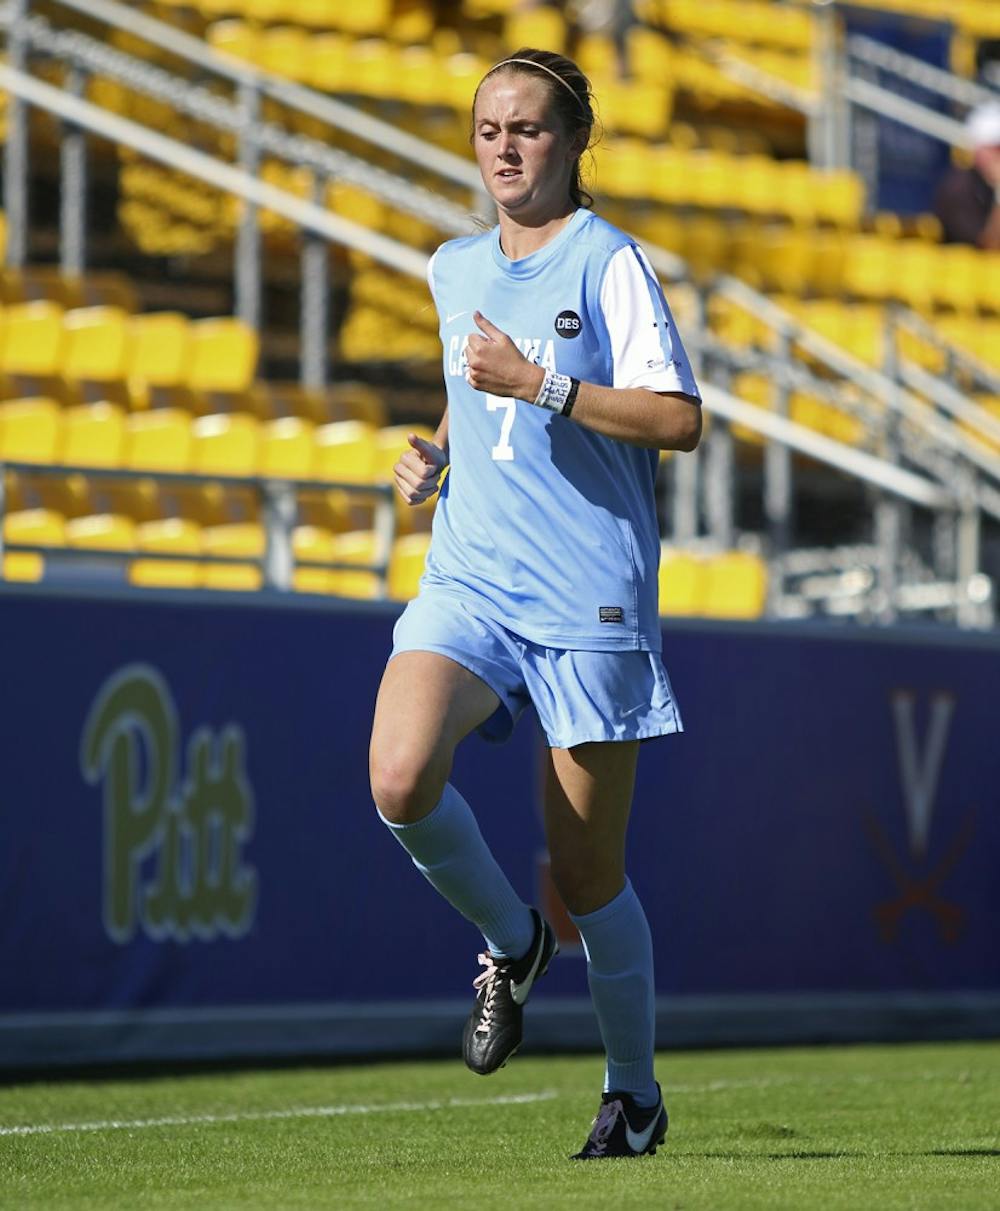 UNC midfielder Annie Kingman (7) warms up before the rest of the women’s soccer team takes the field. Kingman had a strong game in the ACC semi-finals on Friday, with one goal and one assist.